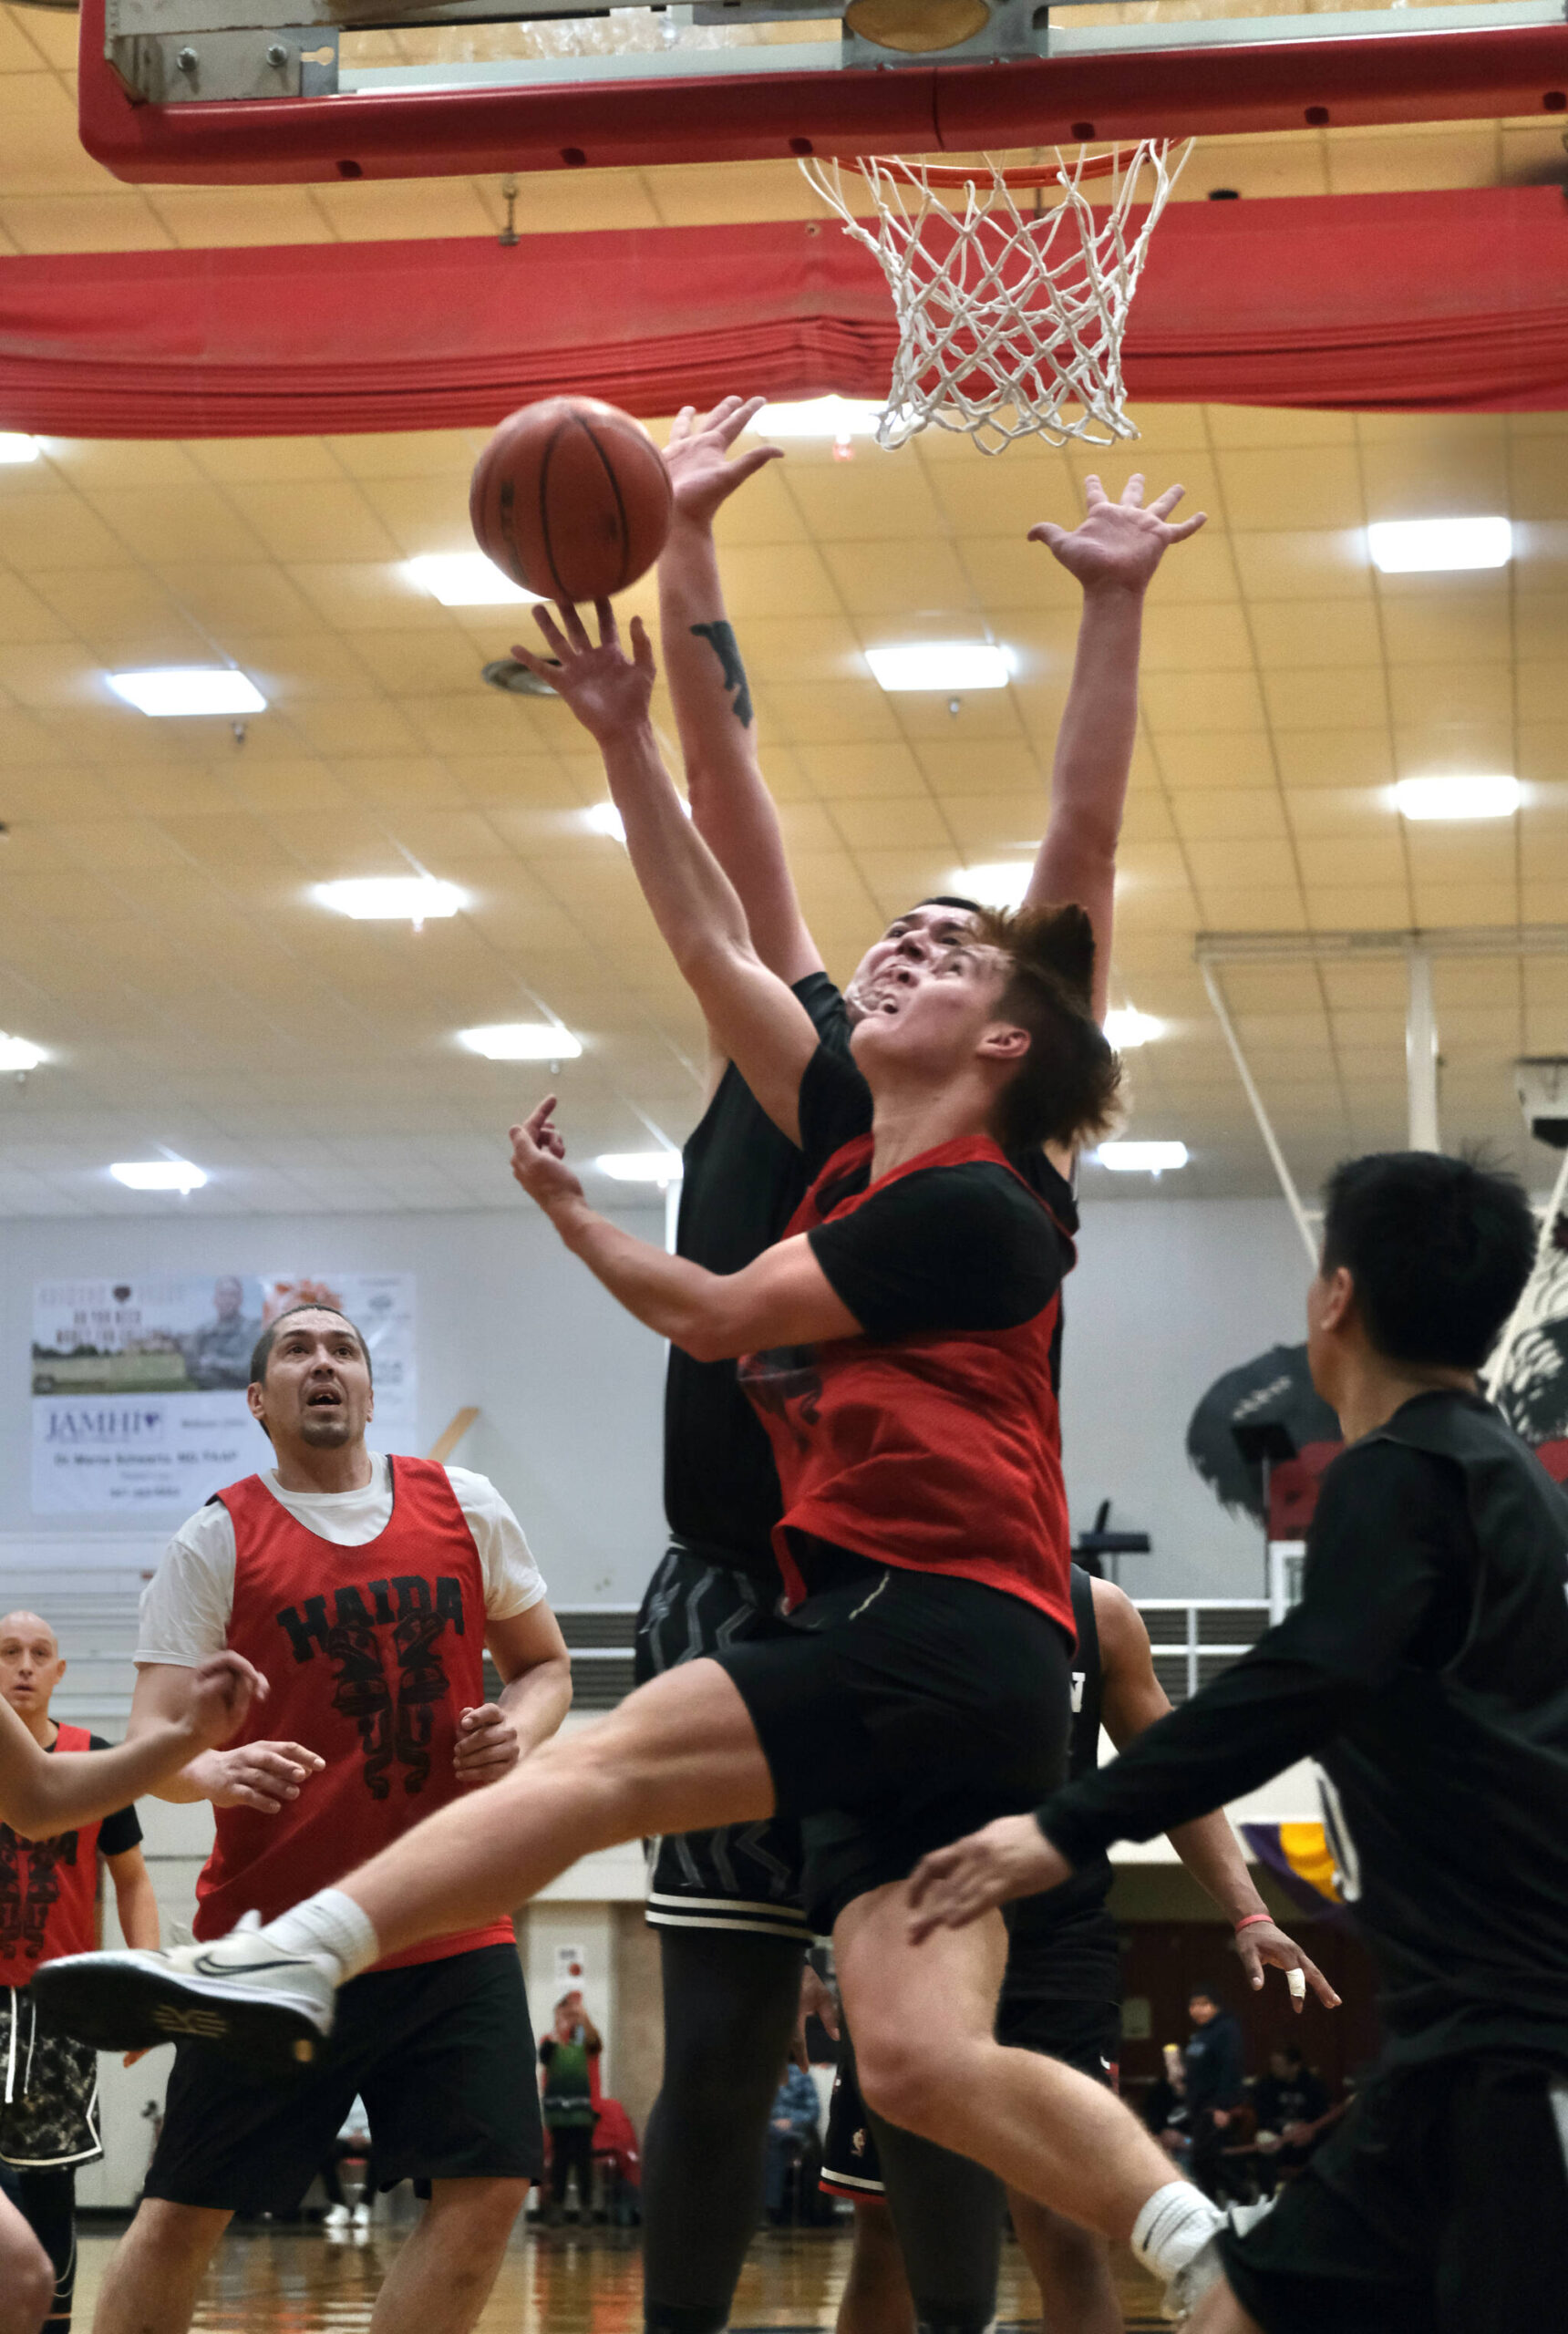 Hydaburg’s Jaren Carle puts a shot up against Angoon’s Kendrick Payton during B Bracket action during the Juneau Lions Club 74th Annual Gold Medal Basketball Tournament, Sunday, March 19, at the Juneau-Douglas High School: Yadaa.at Kalé gymnasium. (Klas Stolpe / For the Juneau Empire)